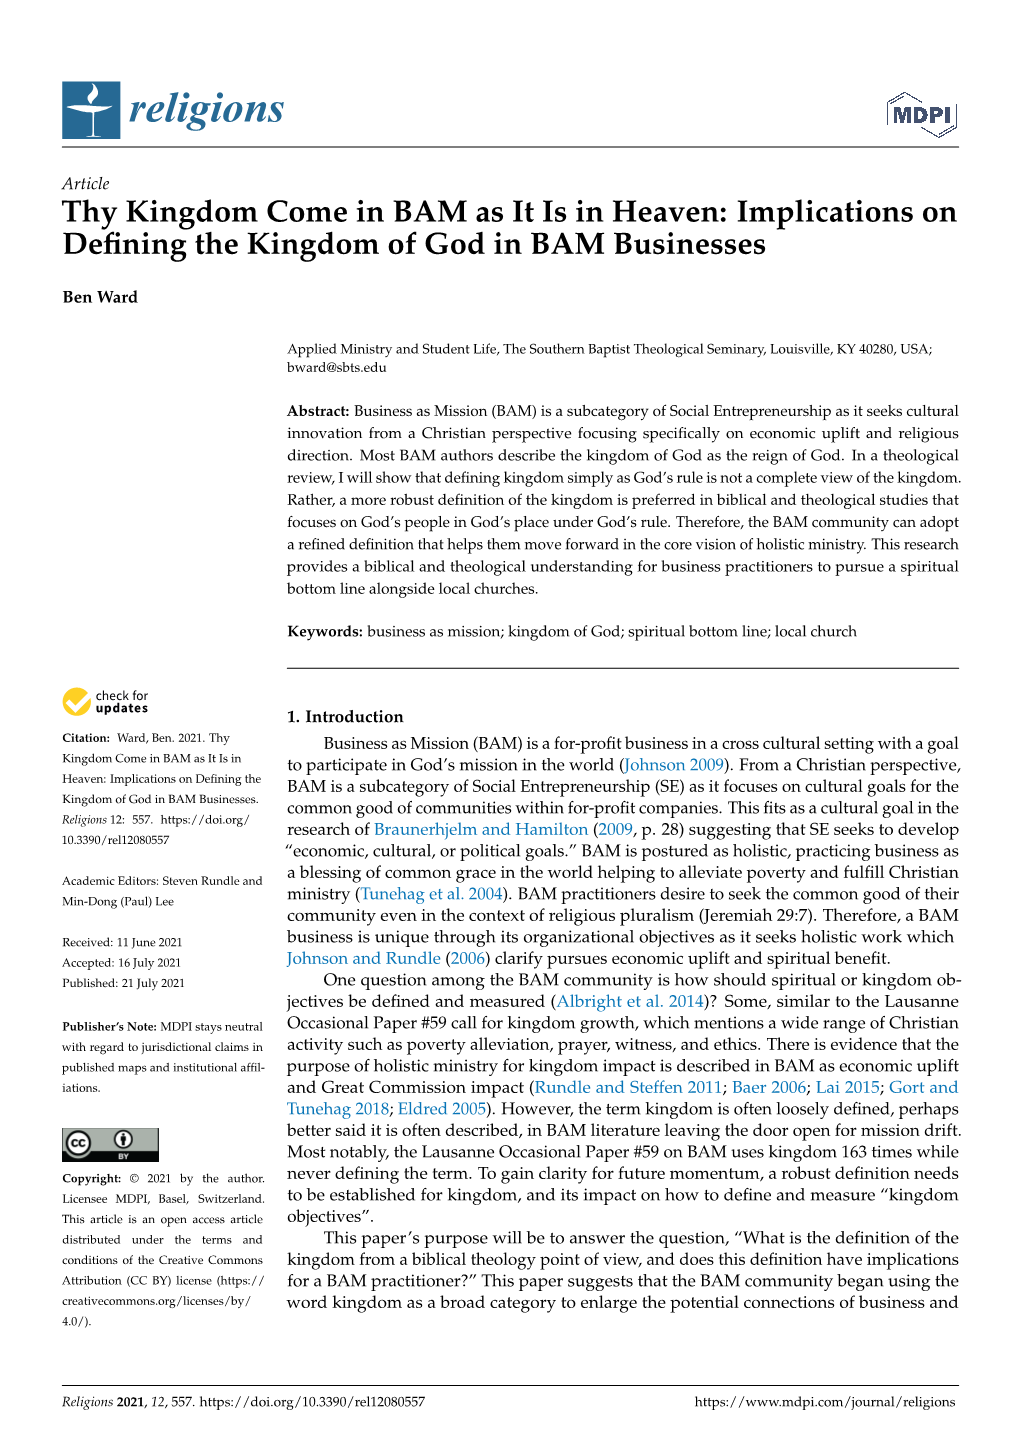 Implications on Defining the Kingdom of God in BAM Businesses